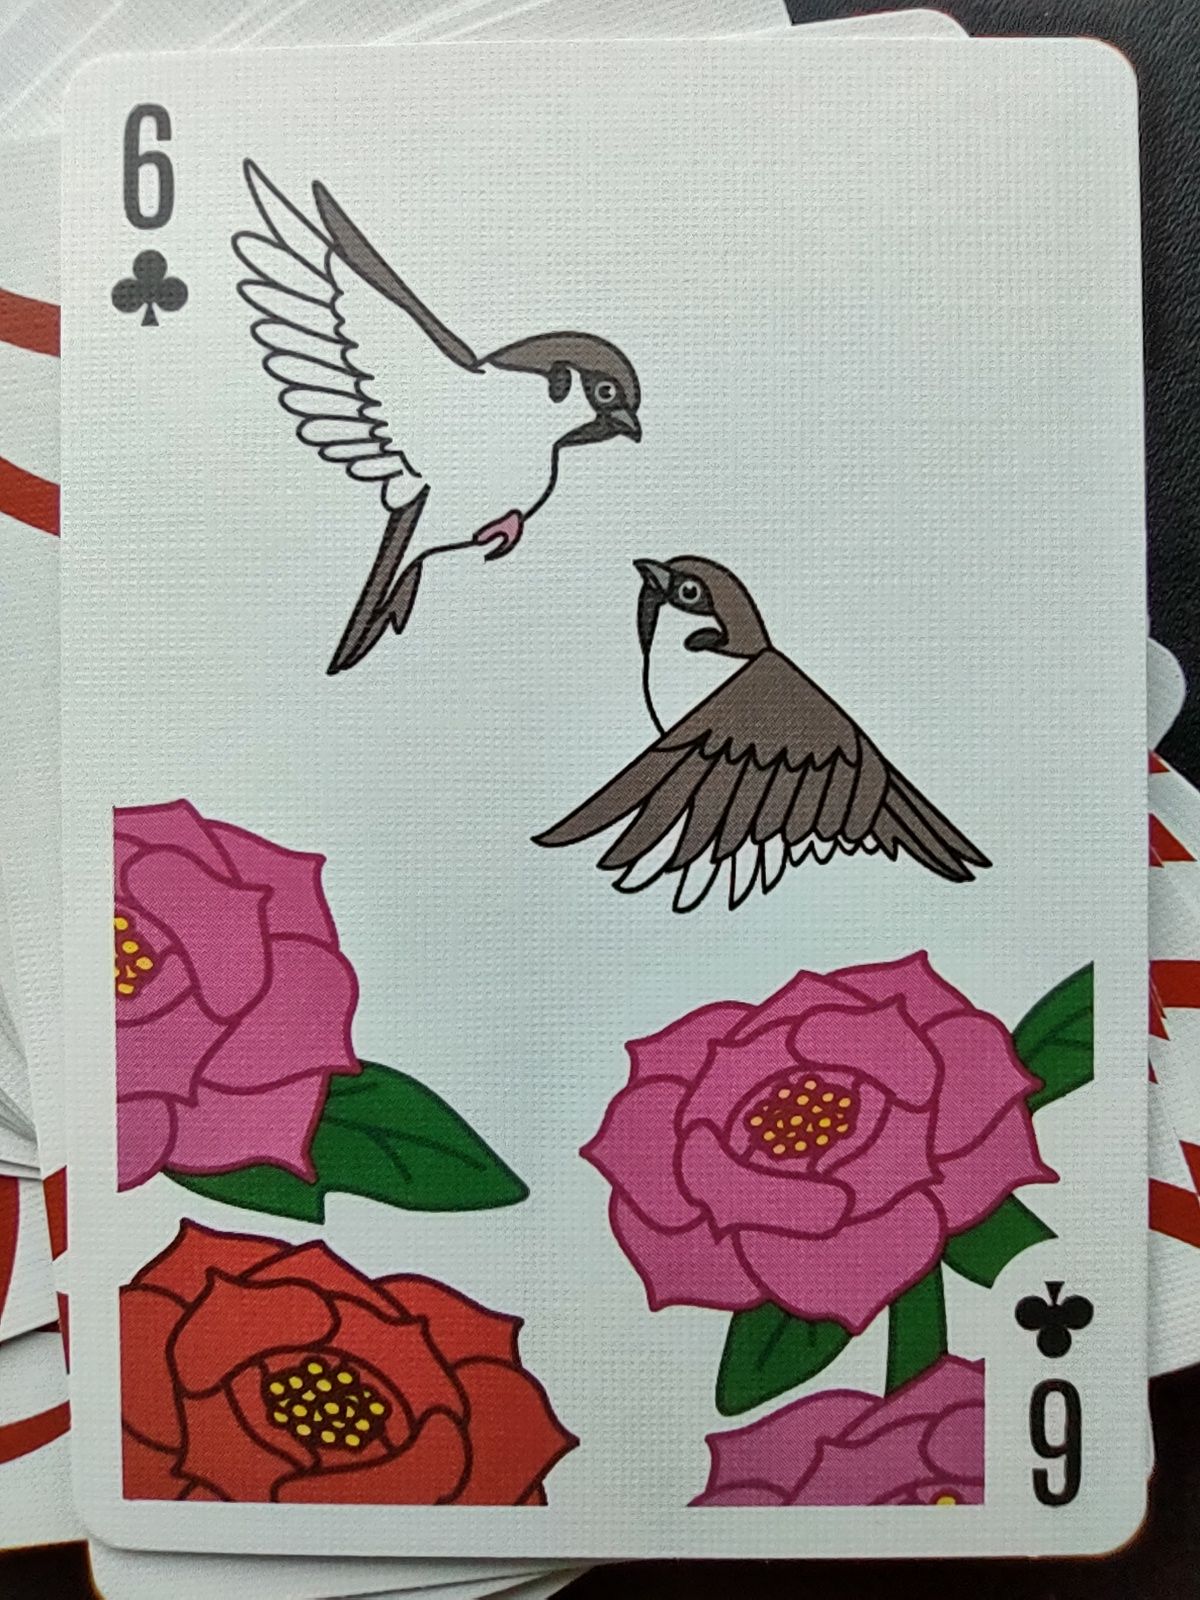 6 of clubs. From the Bicycle Sparrow Hanafuda deck.